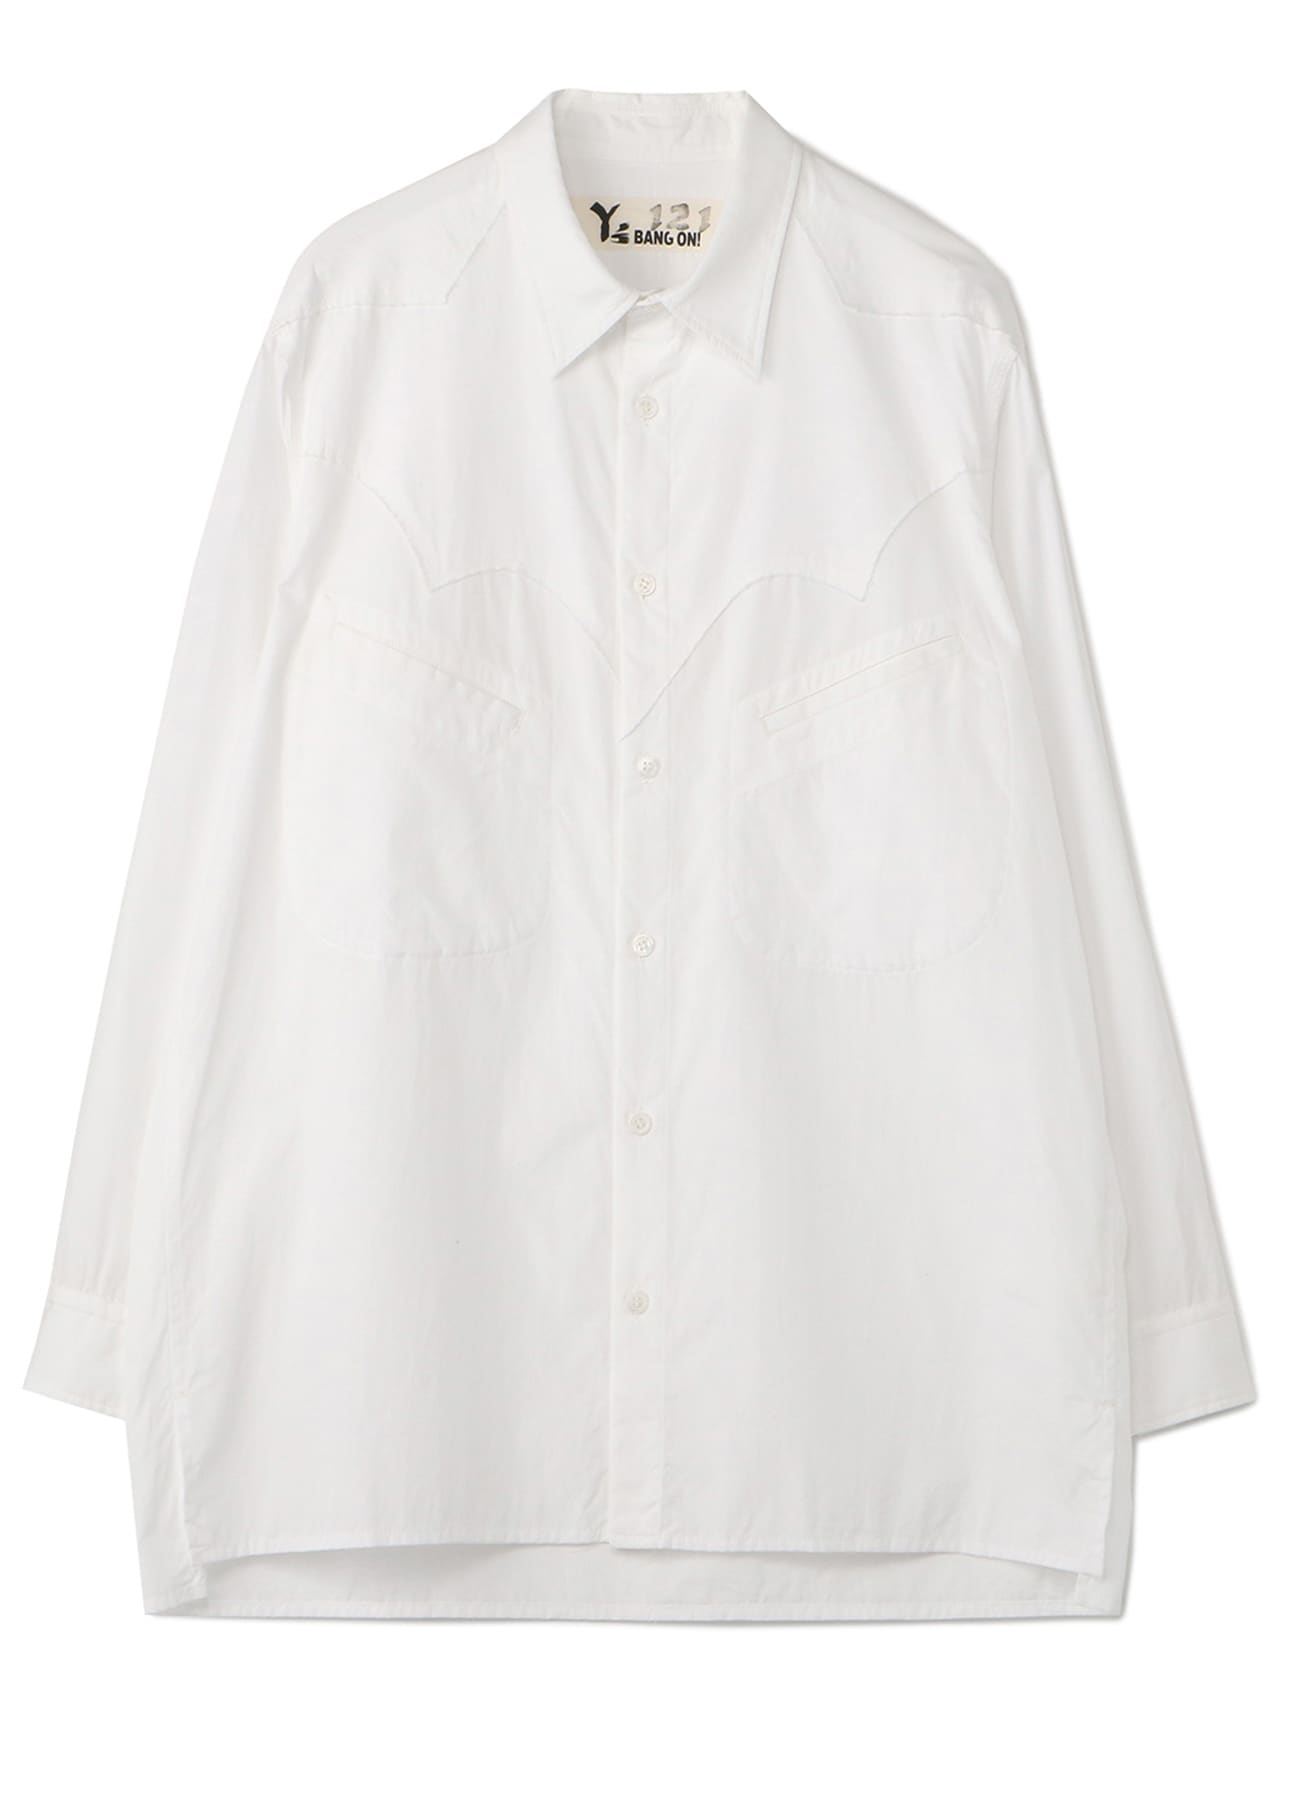 Y's BANG ON! No.121 Western style-shirts Cotton broad(S White 